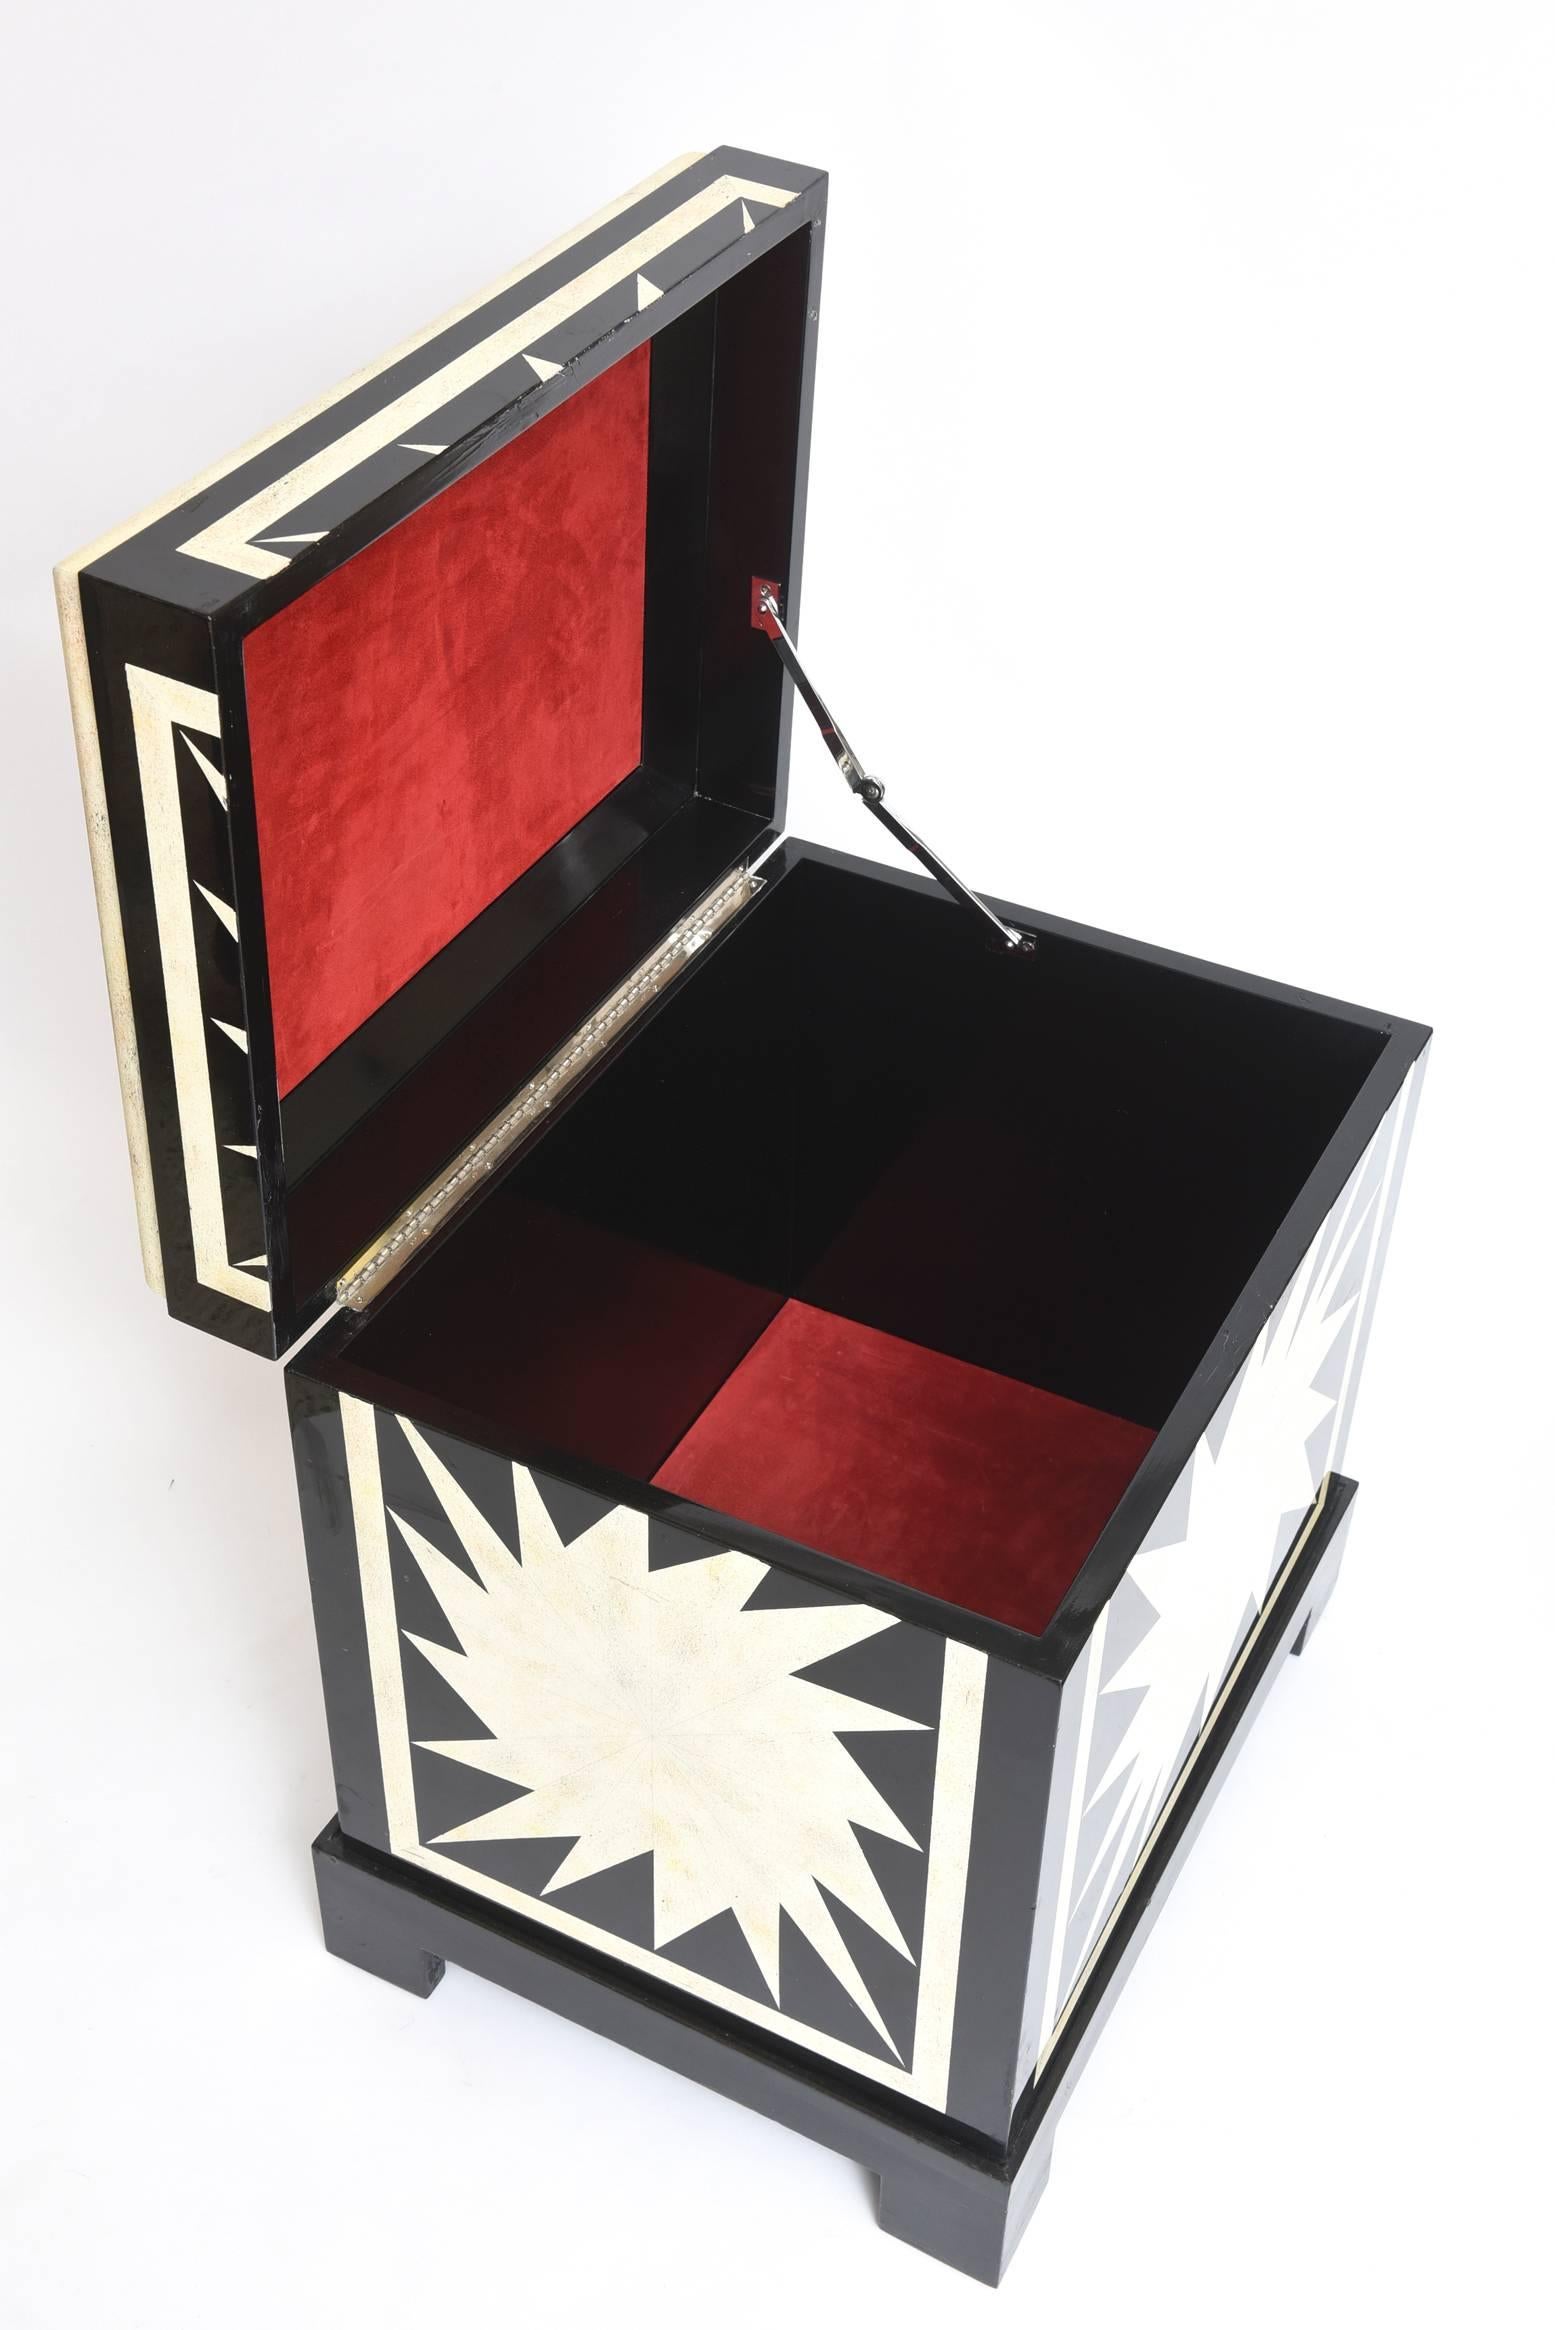 This is one of Karl Springers' most exuberant designs.
The Graphic nature of the design conceals ample storage.